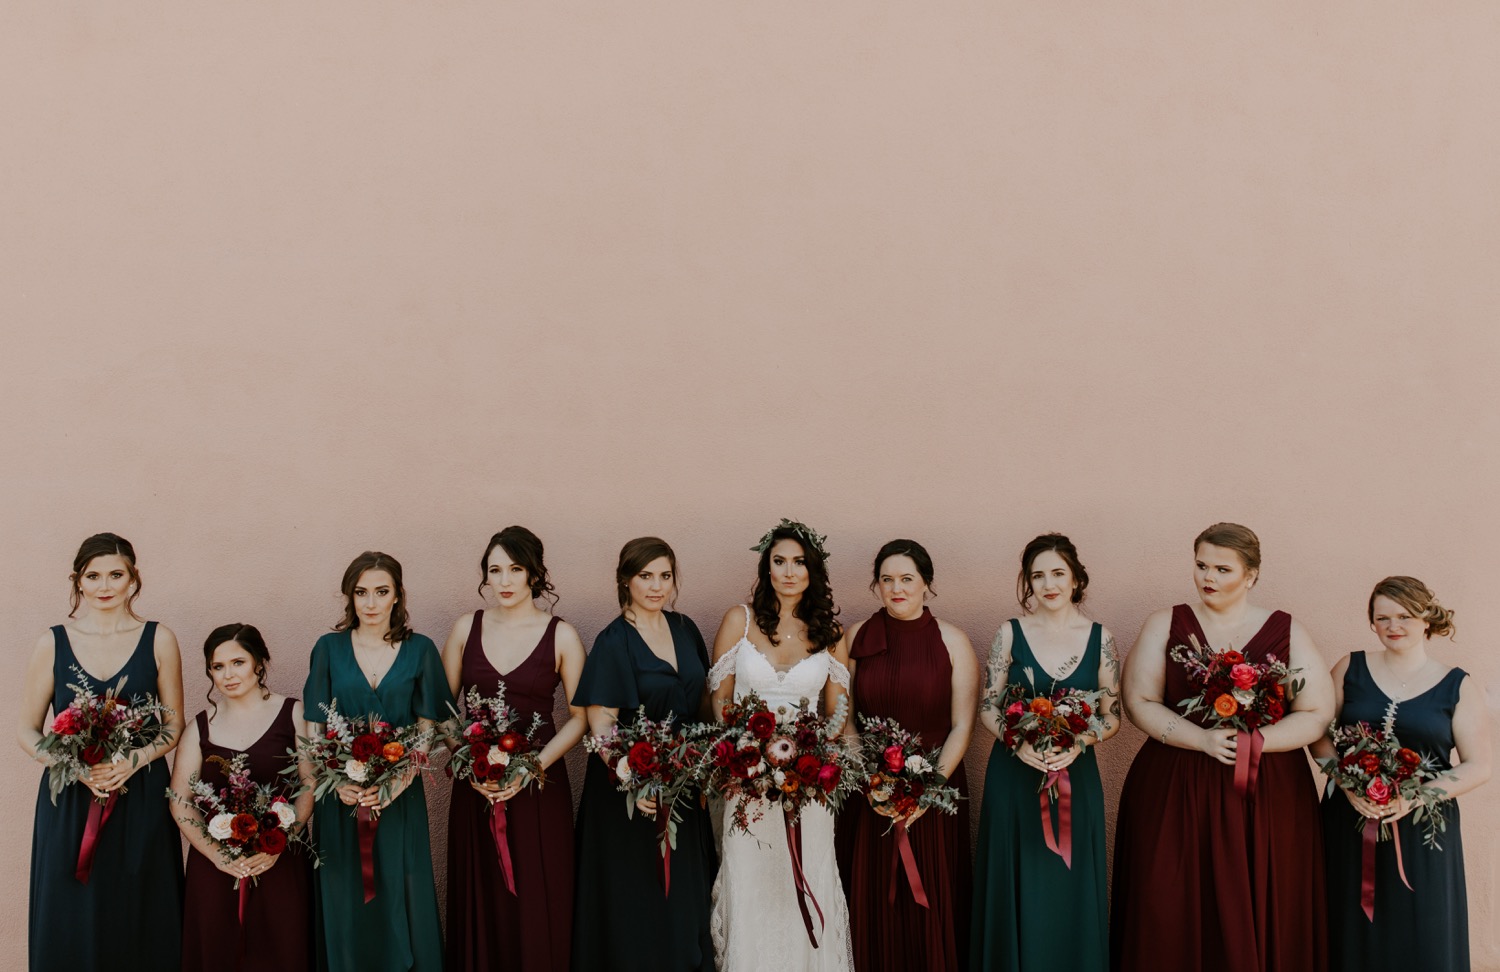 Bridal party striking a pose against a pastel pink wall